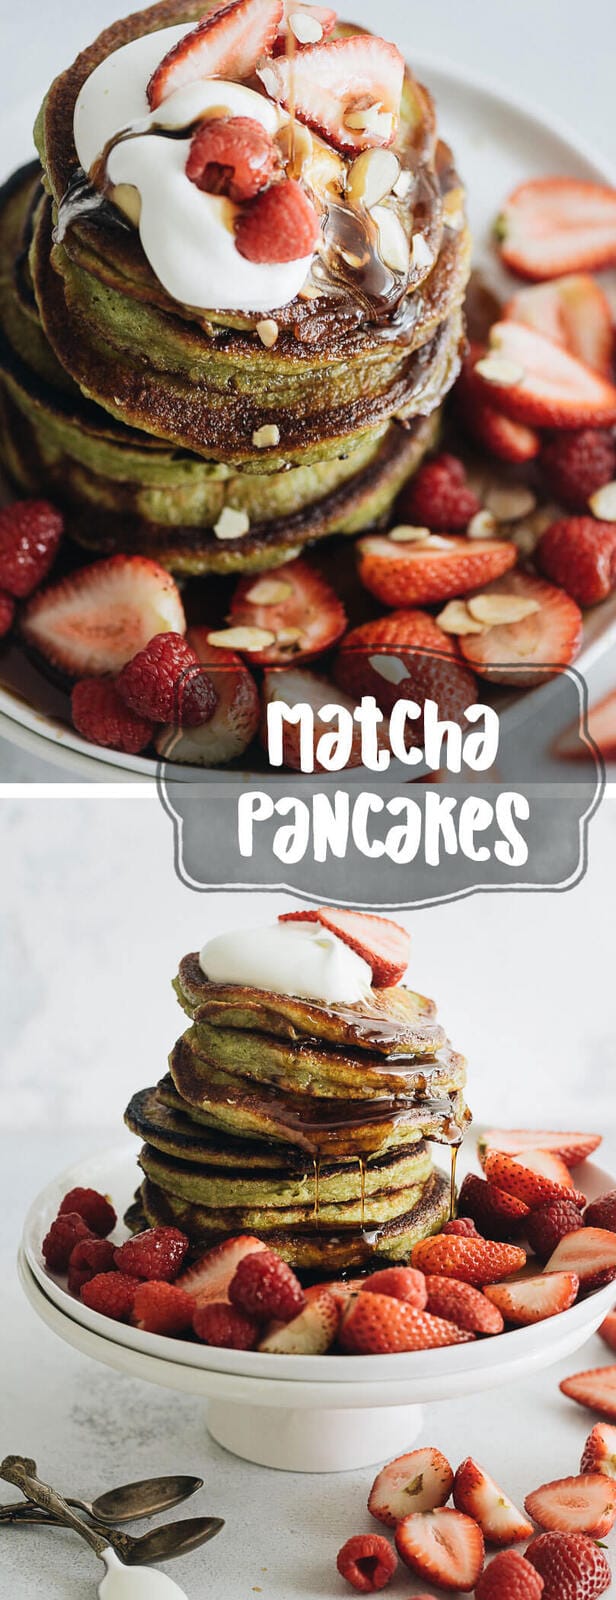 These light and fluffy matcha pancakes are super delicious and it also makes a stunning presentation. Perfect for Mother’s Day brunch or a Sunday breakfast with your loved ones. #holiday #breakfast #brunch #recipes #matcha